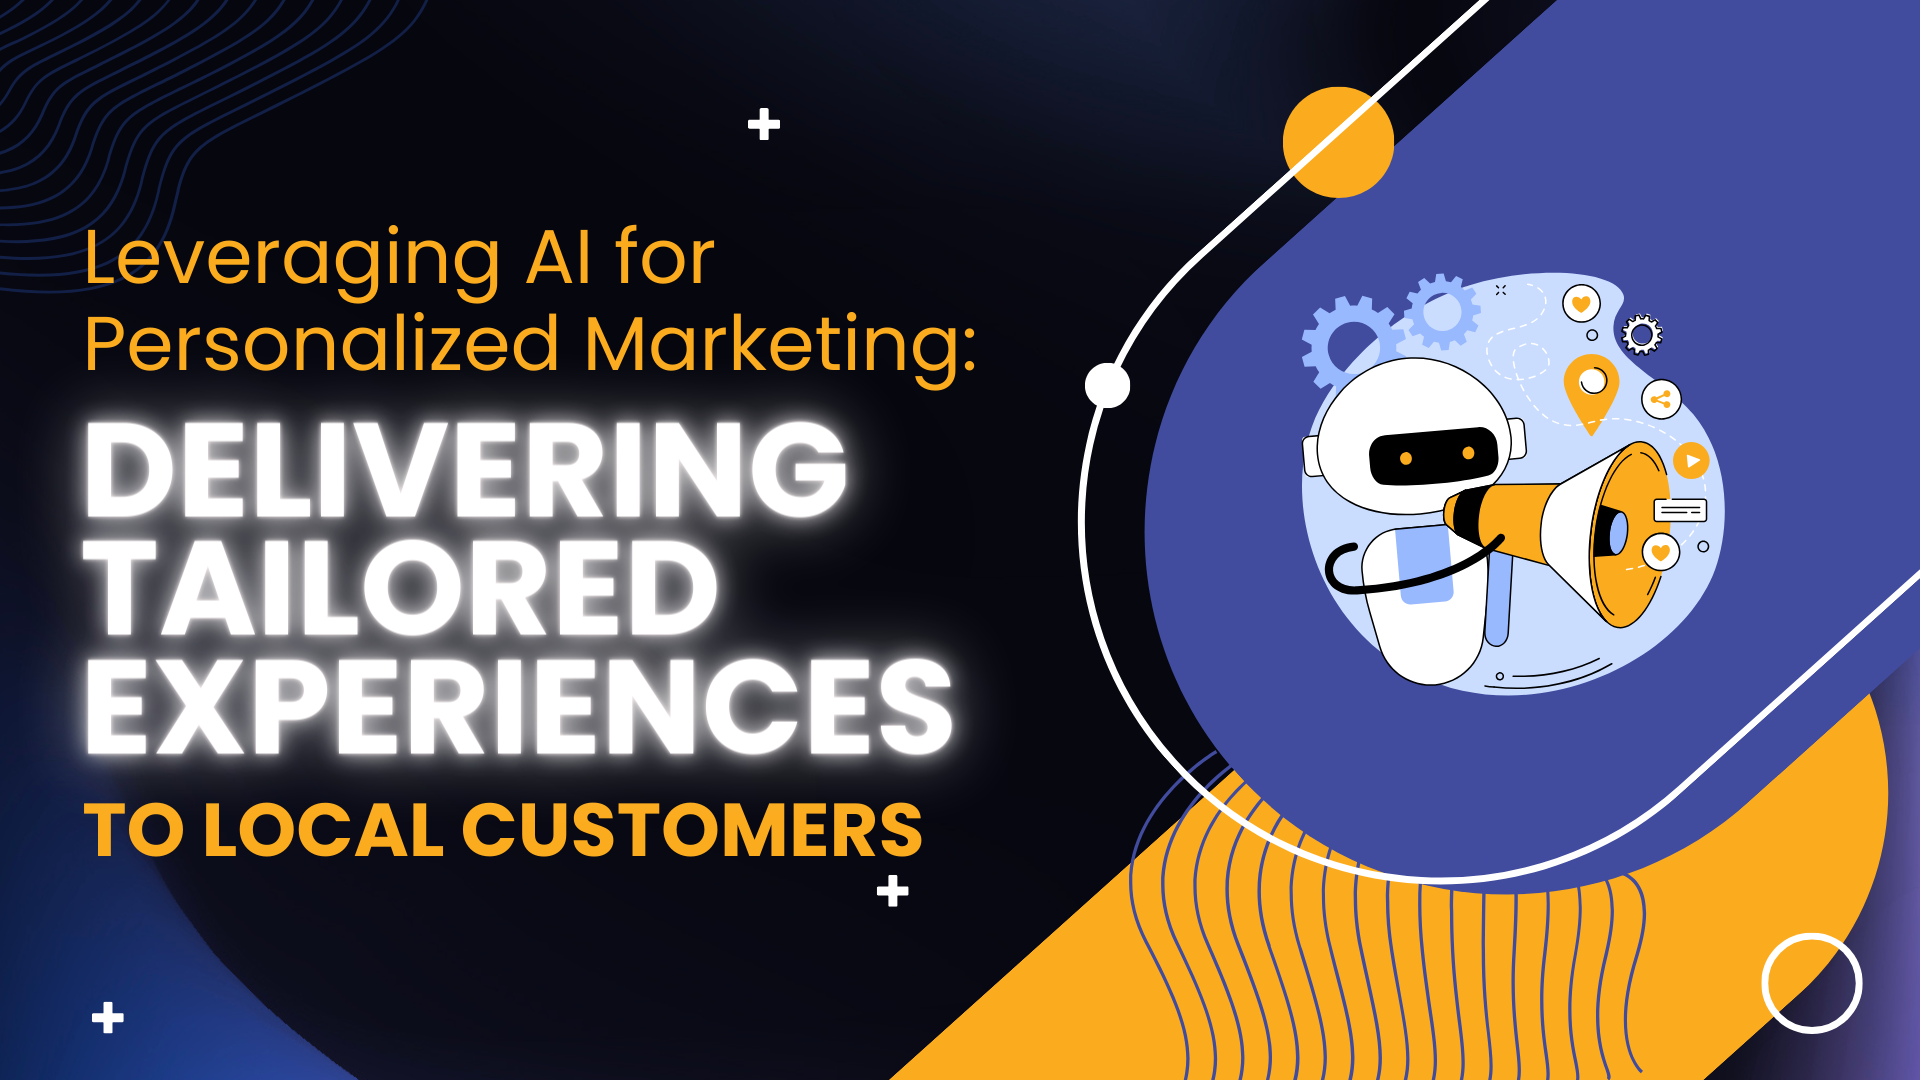 Leveraging AI for Personalized Marketing